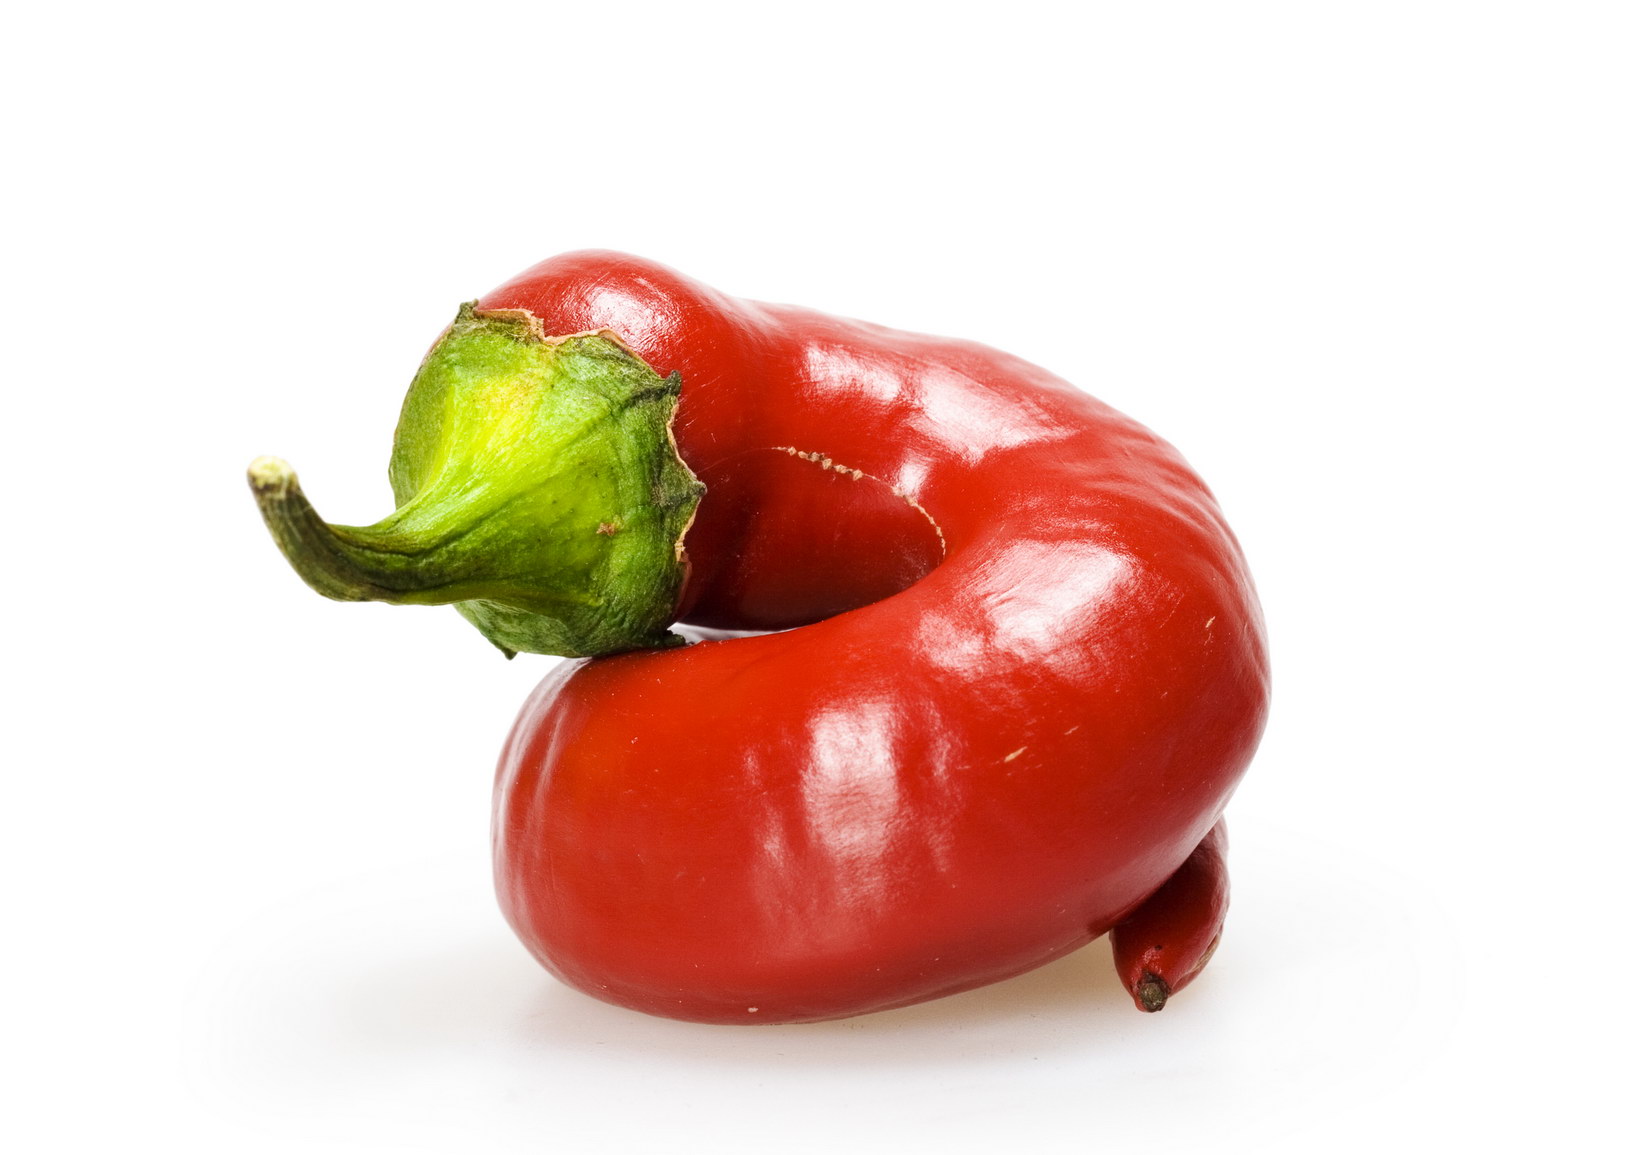 Red chilli pepper, Agriculture, Raw, Mexico, Natural, HQ Photo